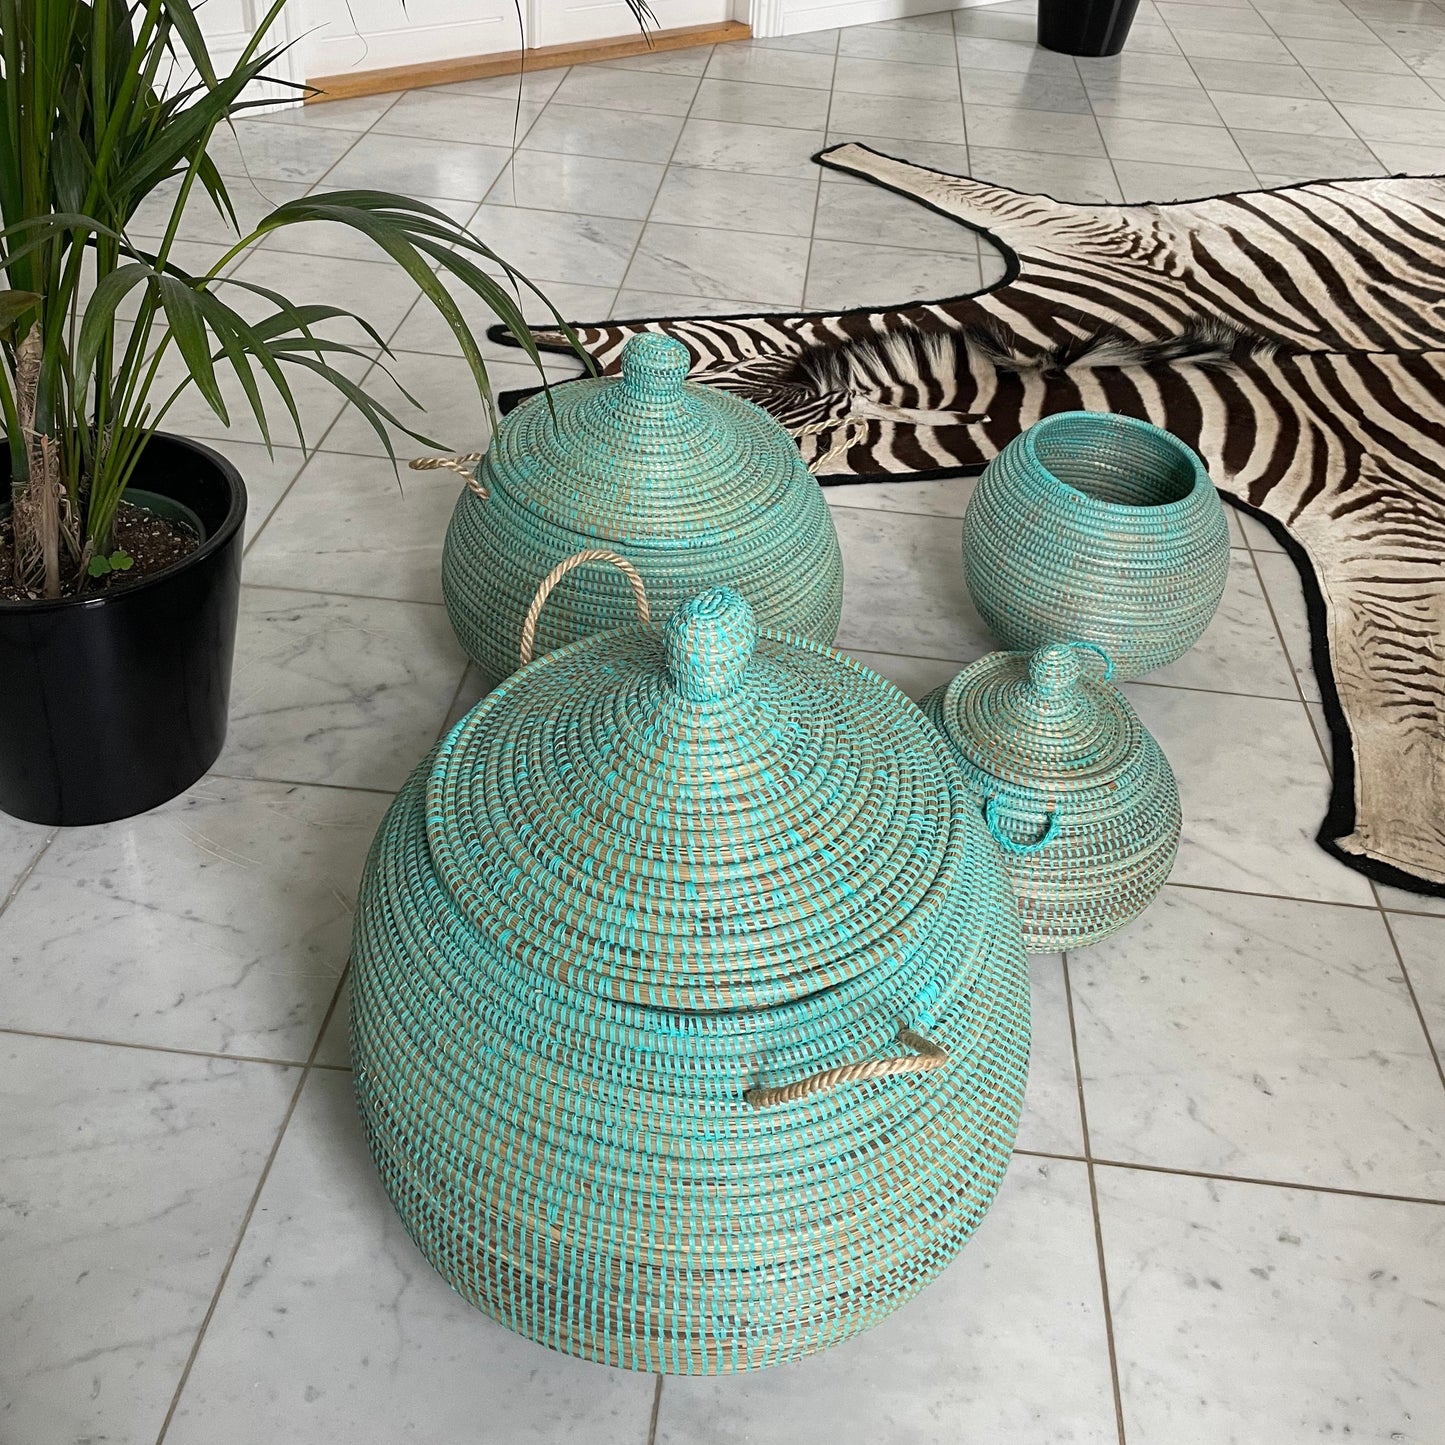 Ball baskets (Ndaa). Handwoven basket with lid in elephant grass with recycled plastic thread. Turquoise. Fair Trade from Senegal